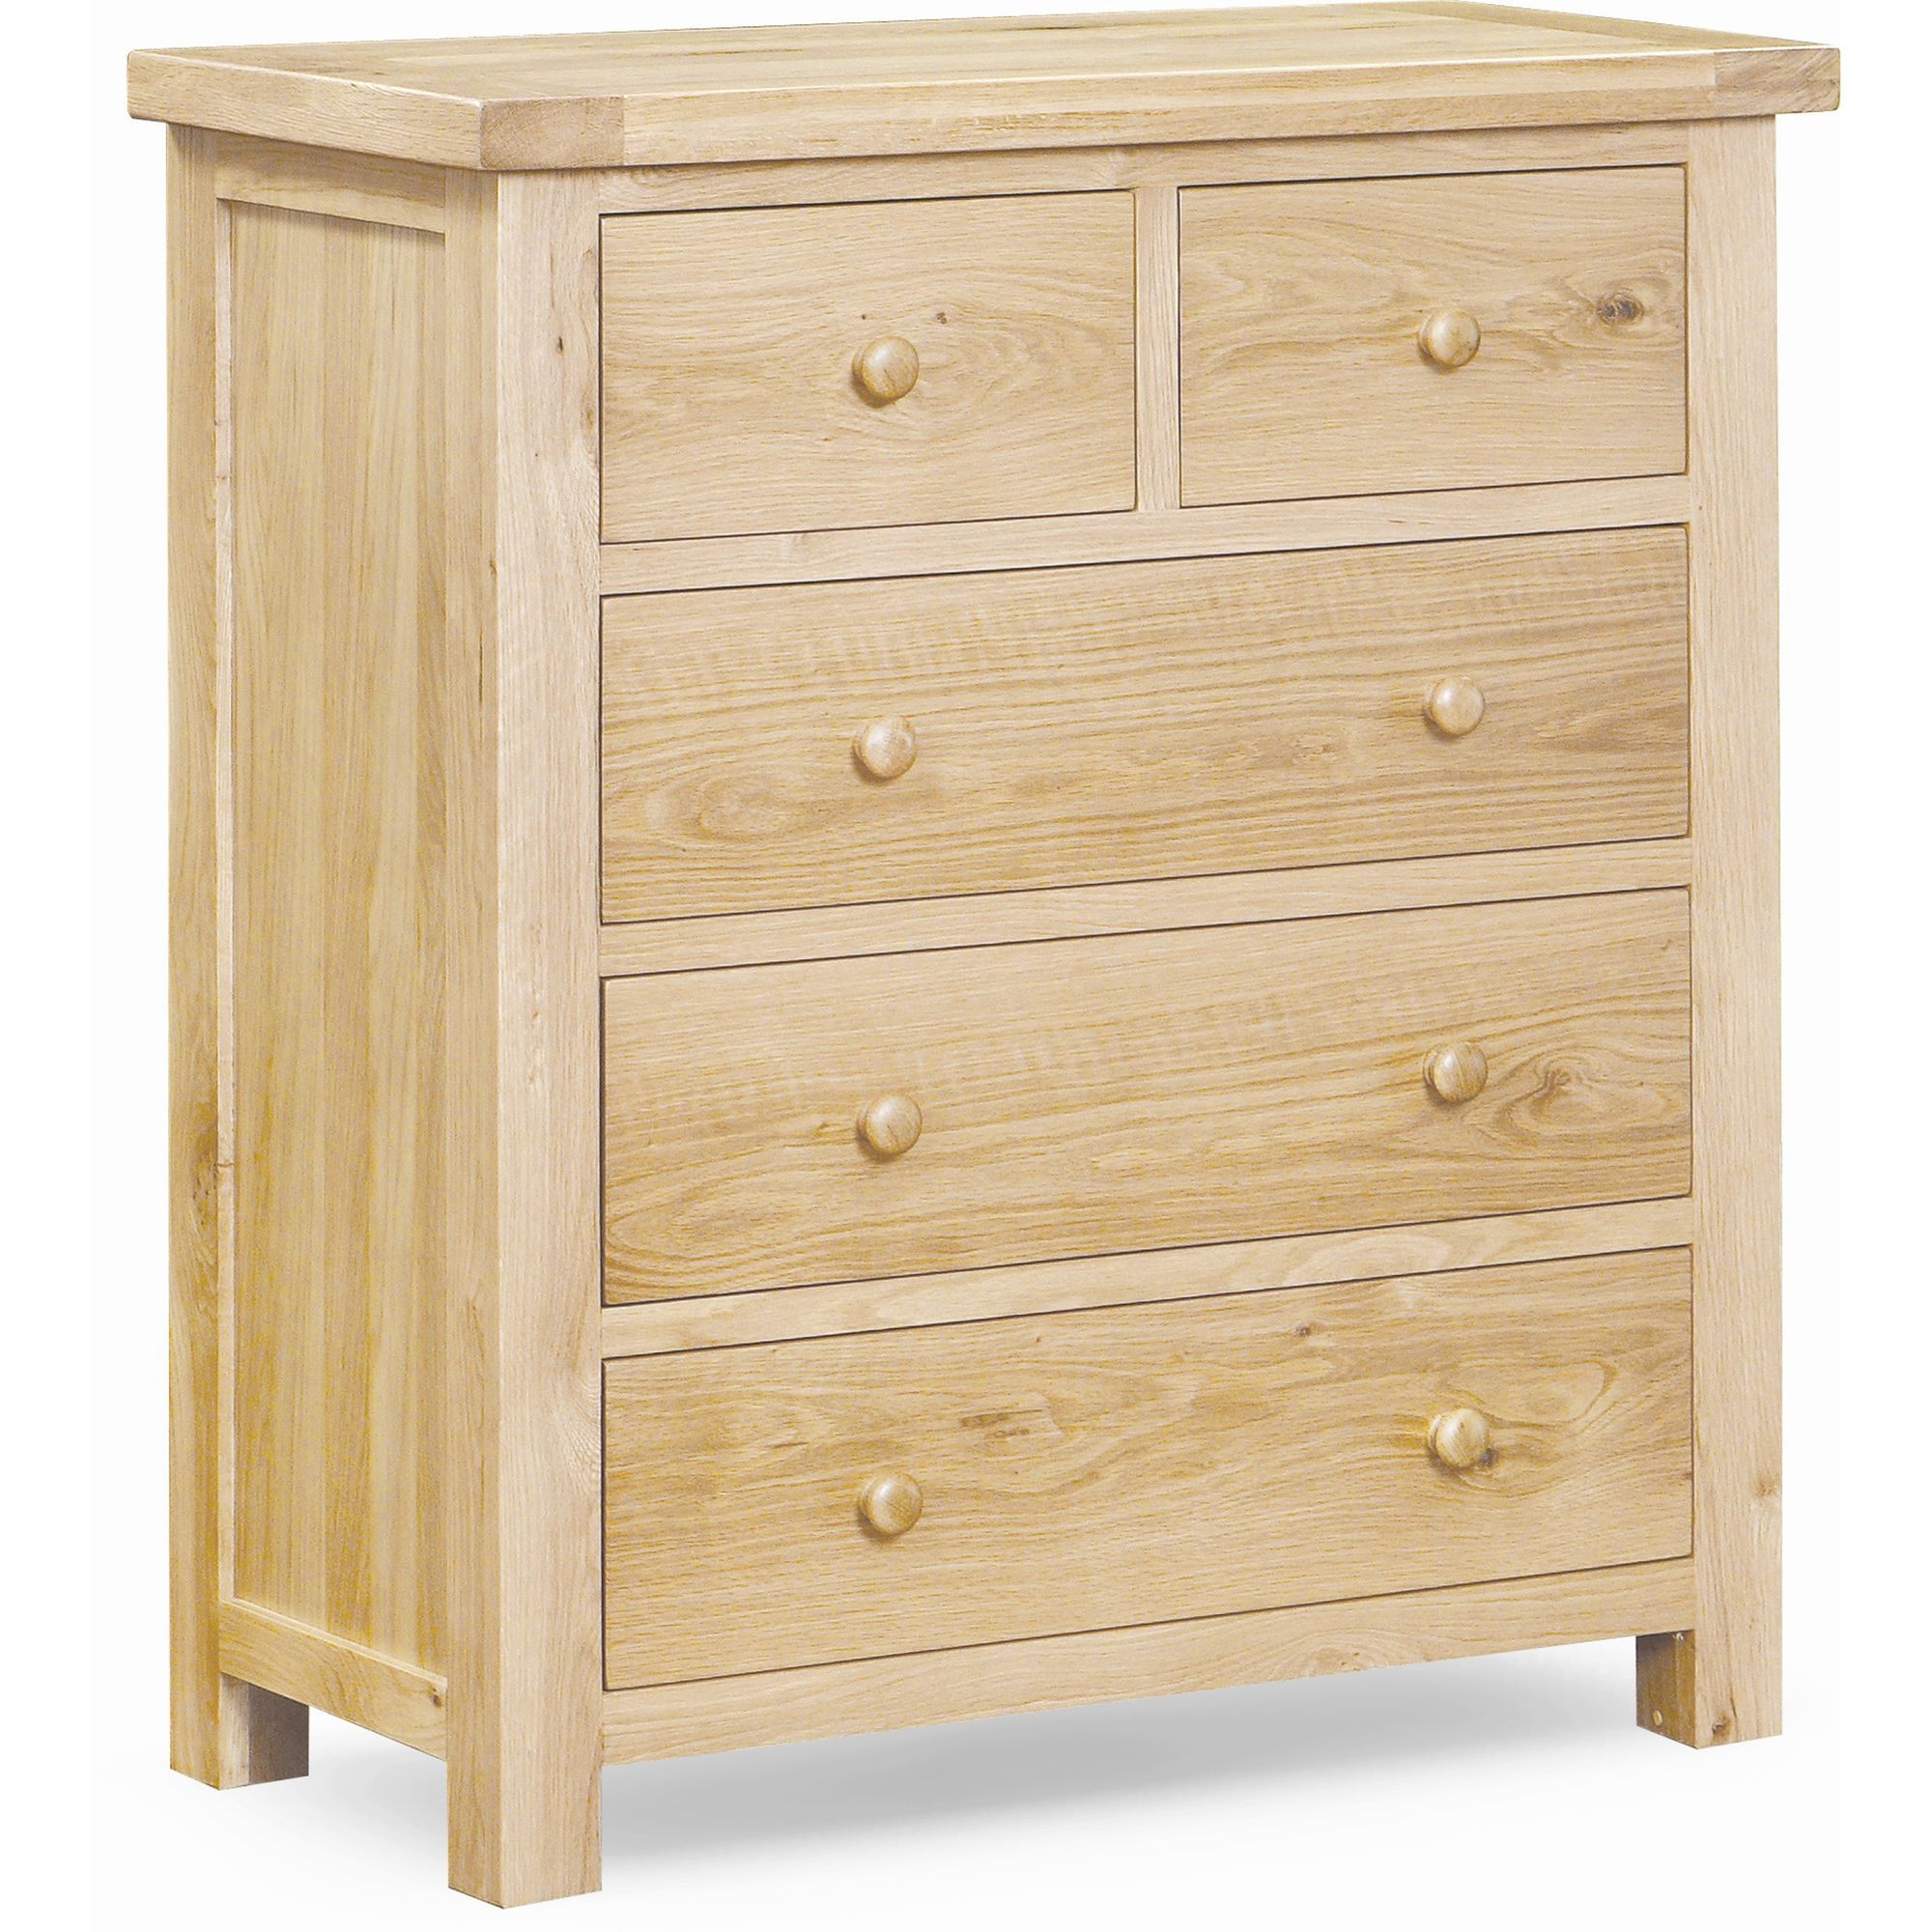 Alterton Furniture Chatsworth 2 Over 3 Drawer Chest at Tesco Direct